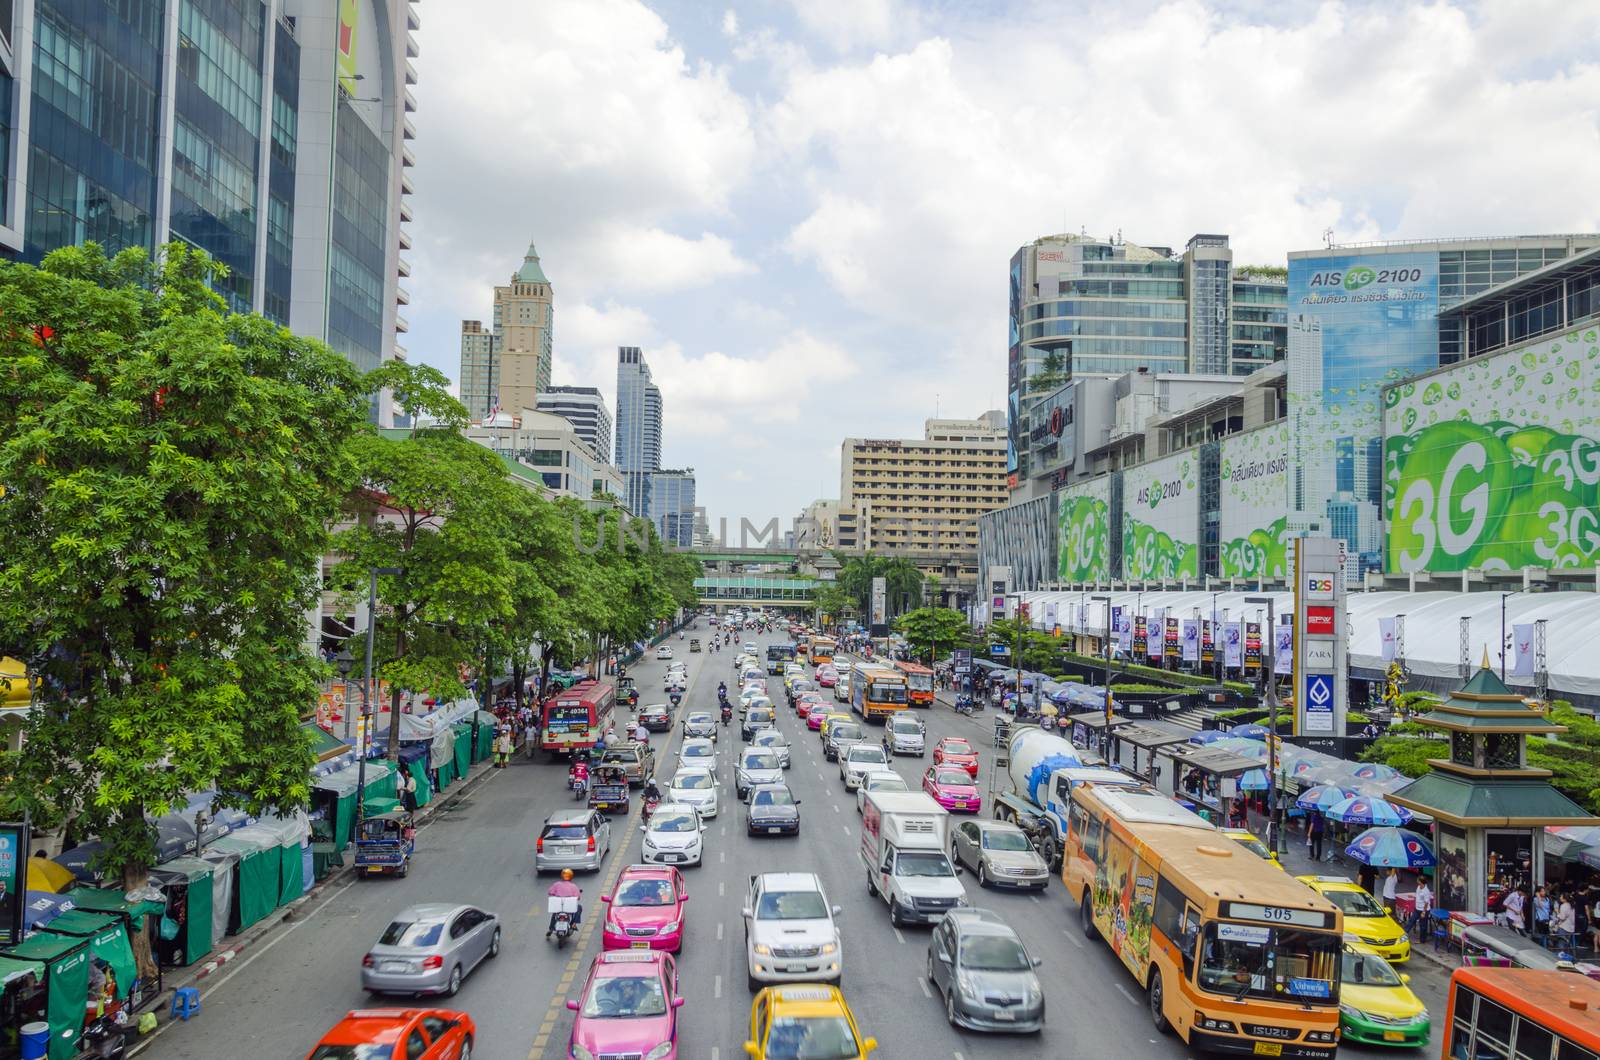 traffic on ratchaprasong road in bangkok thailand on 3 July 2014 by siiixth